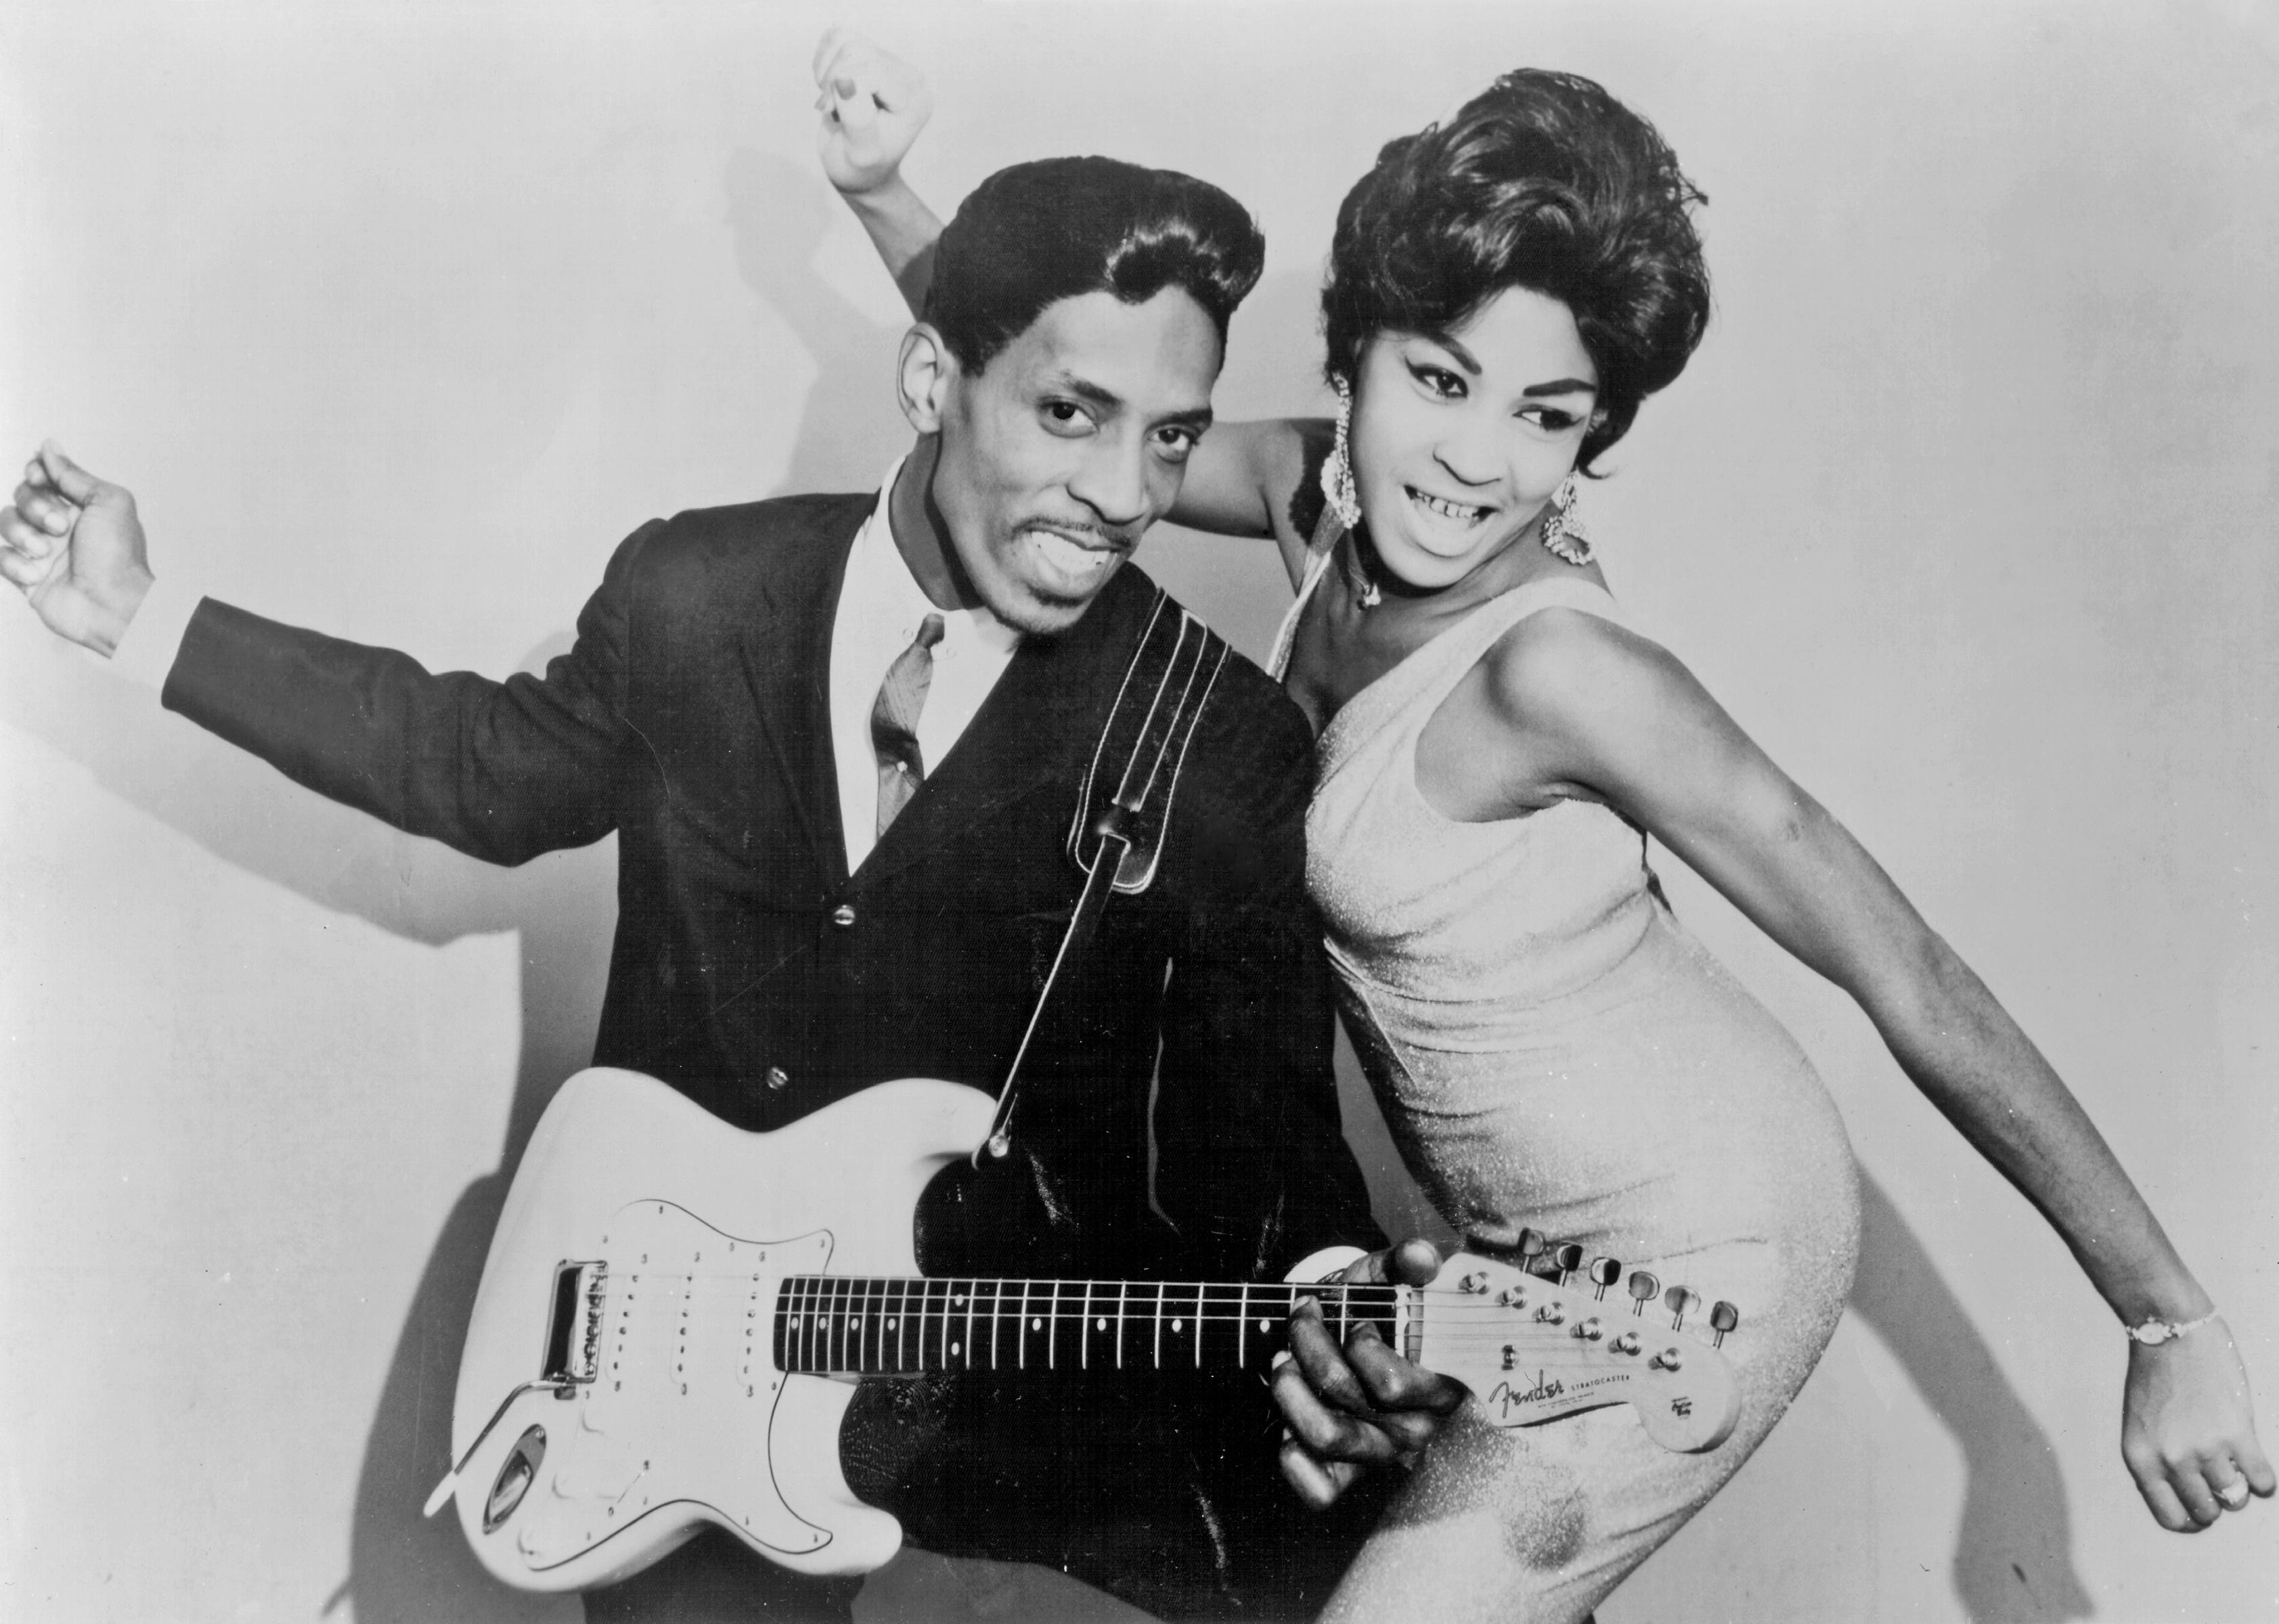 Ike & Tina Turner pose for a portrait in circa 1961.